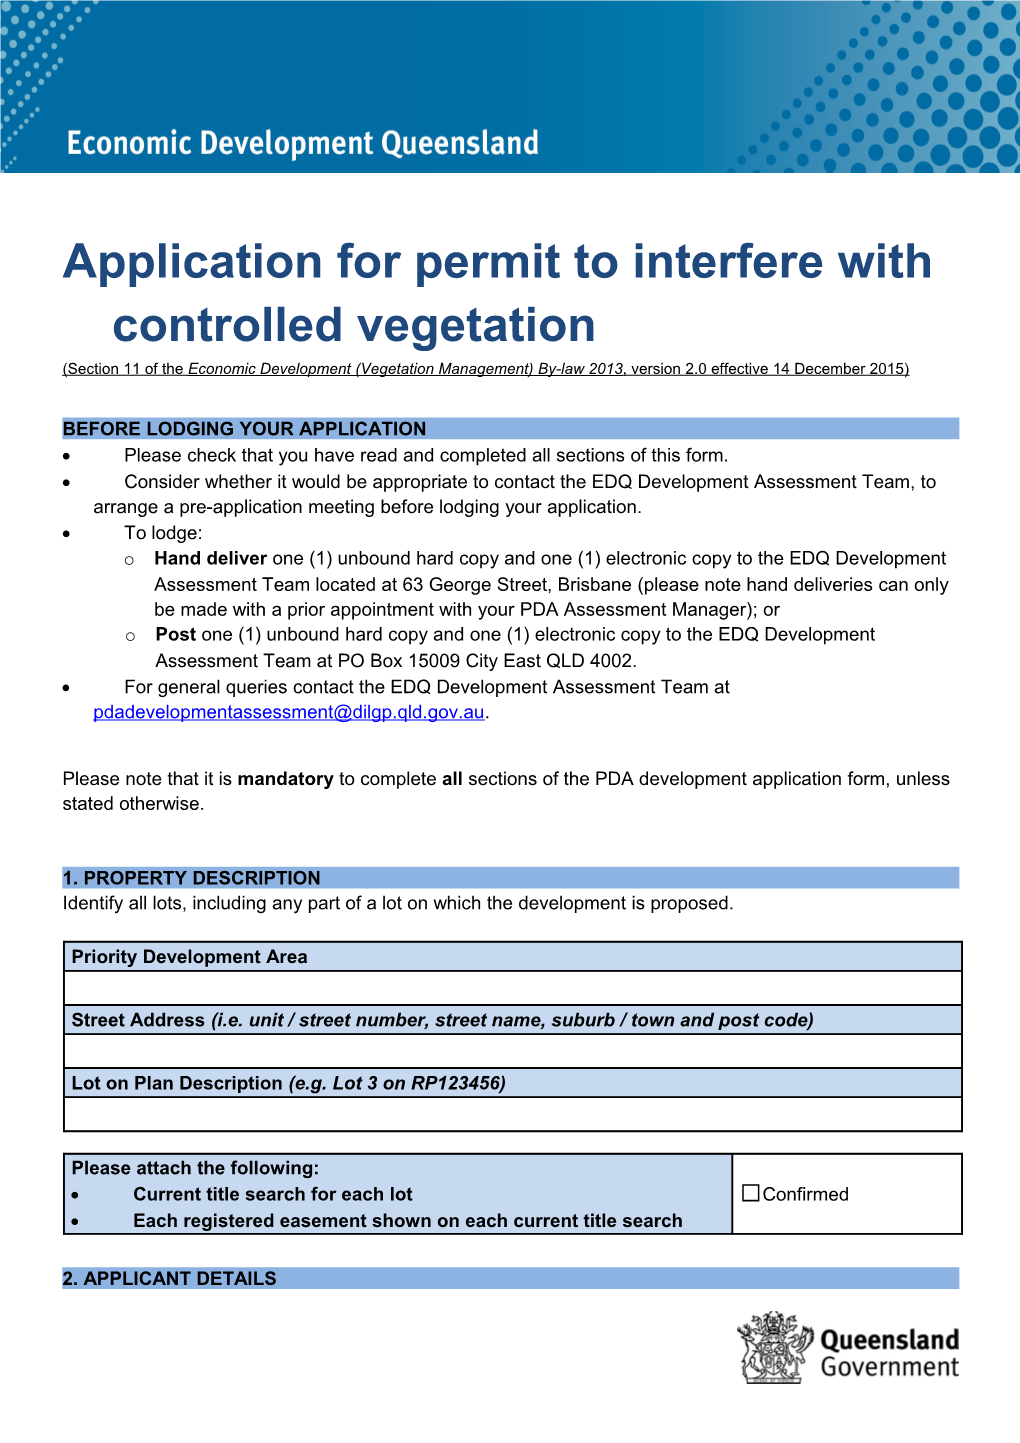 Application for Permit to Interfere with Controlled Vegetation